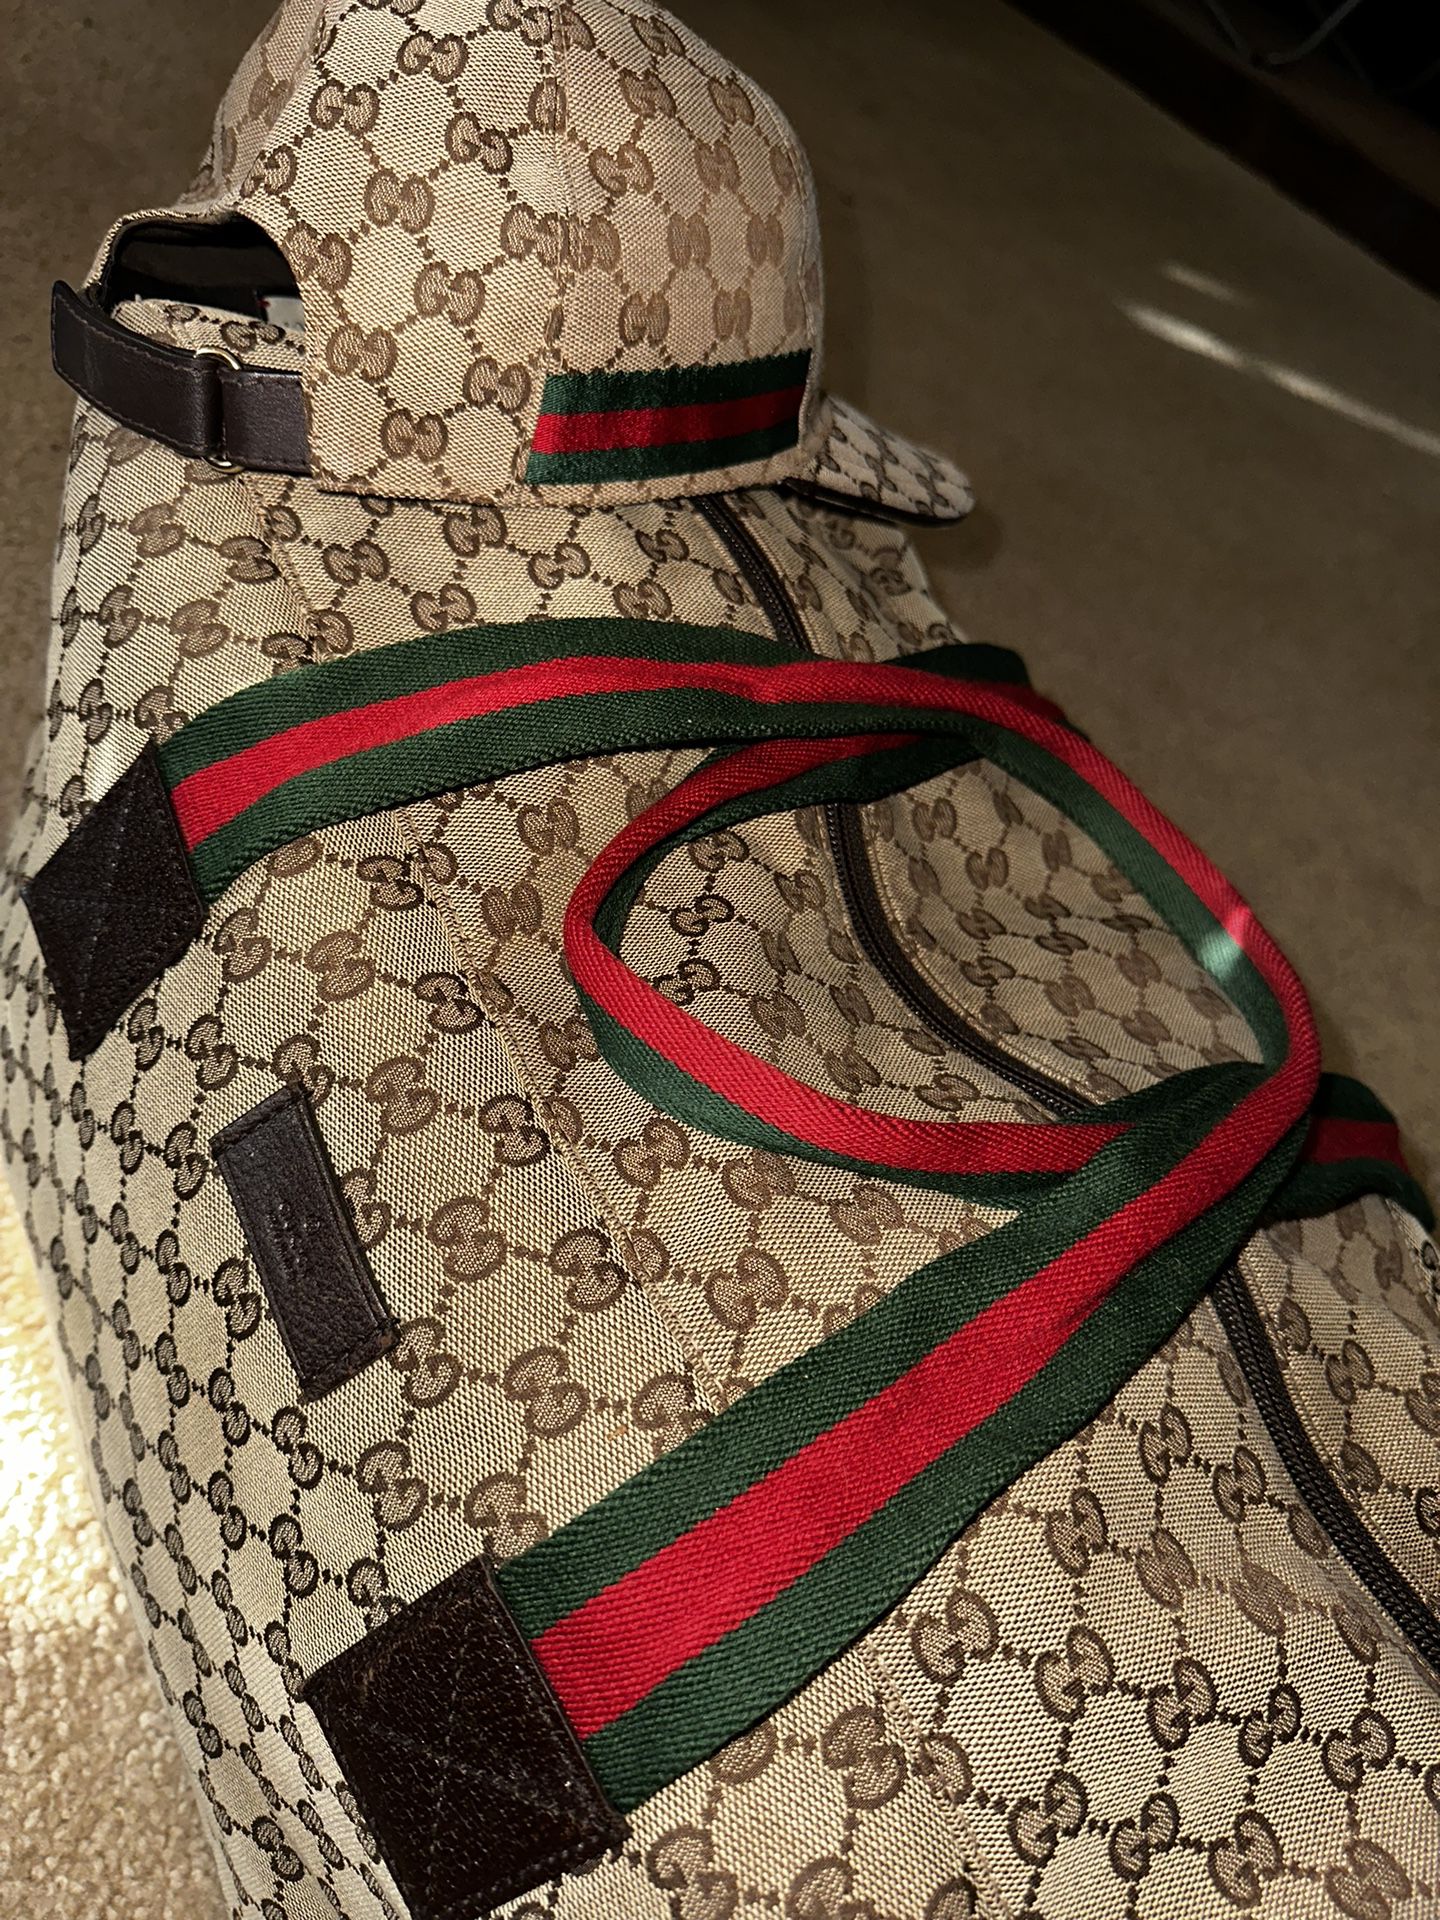 Gucci Hat and Duffle Bag